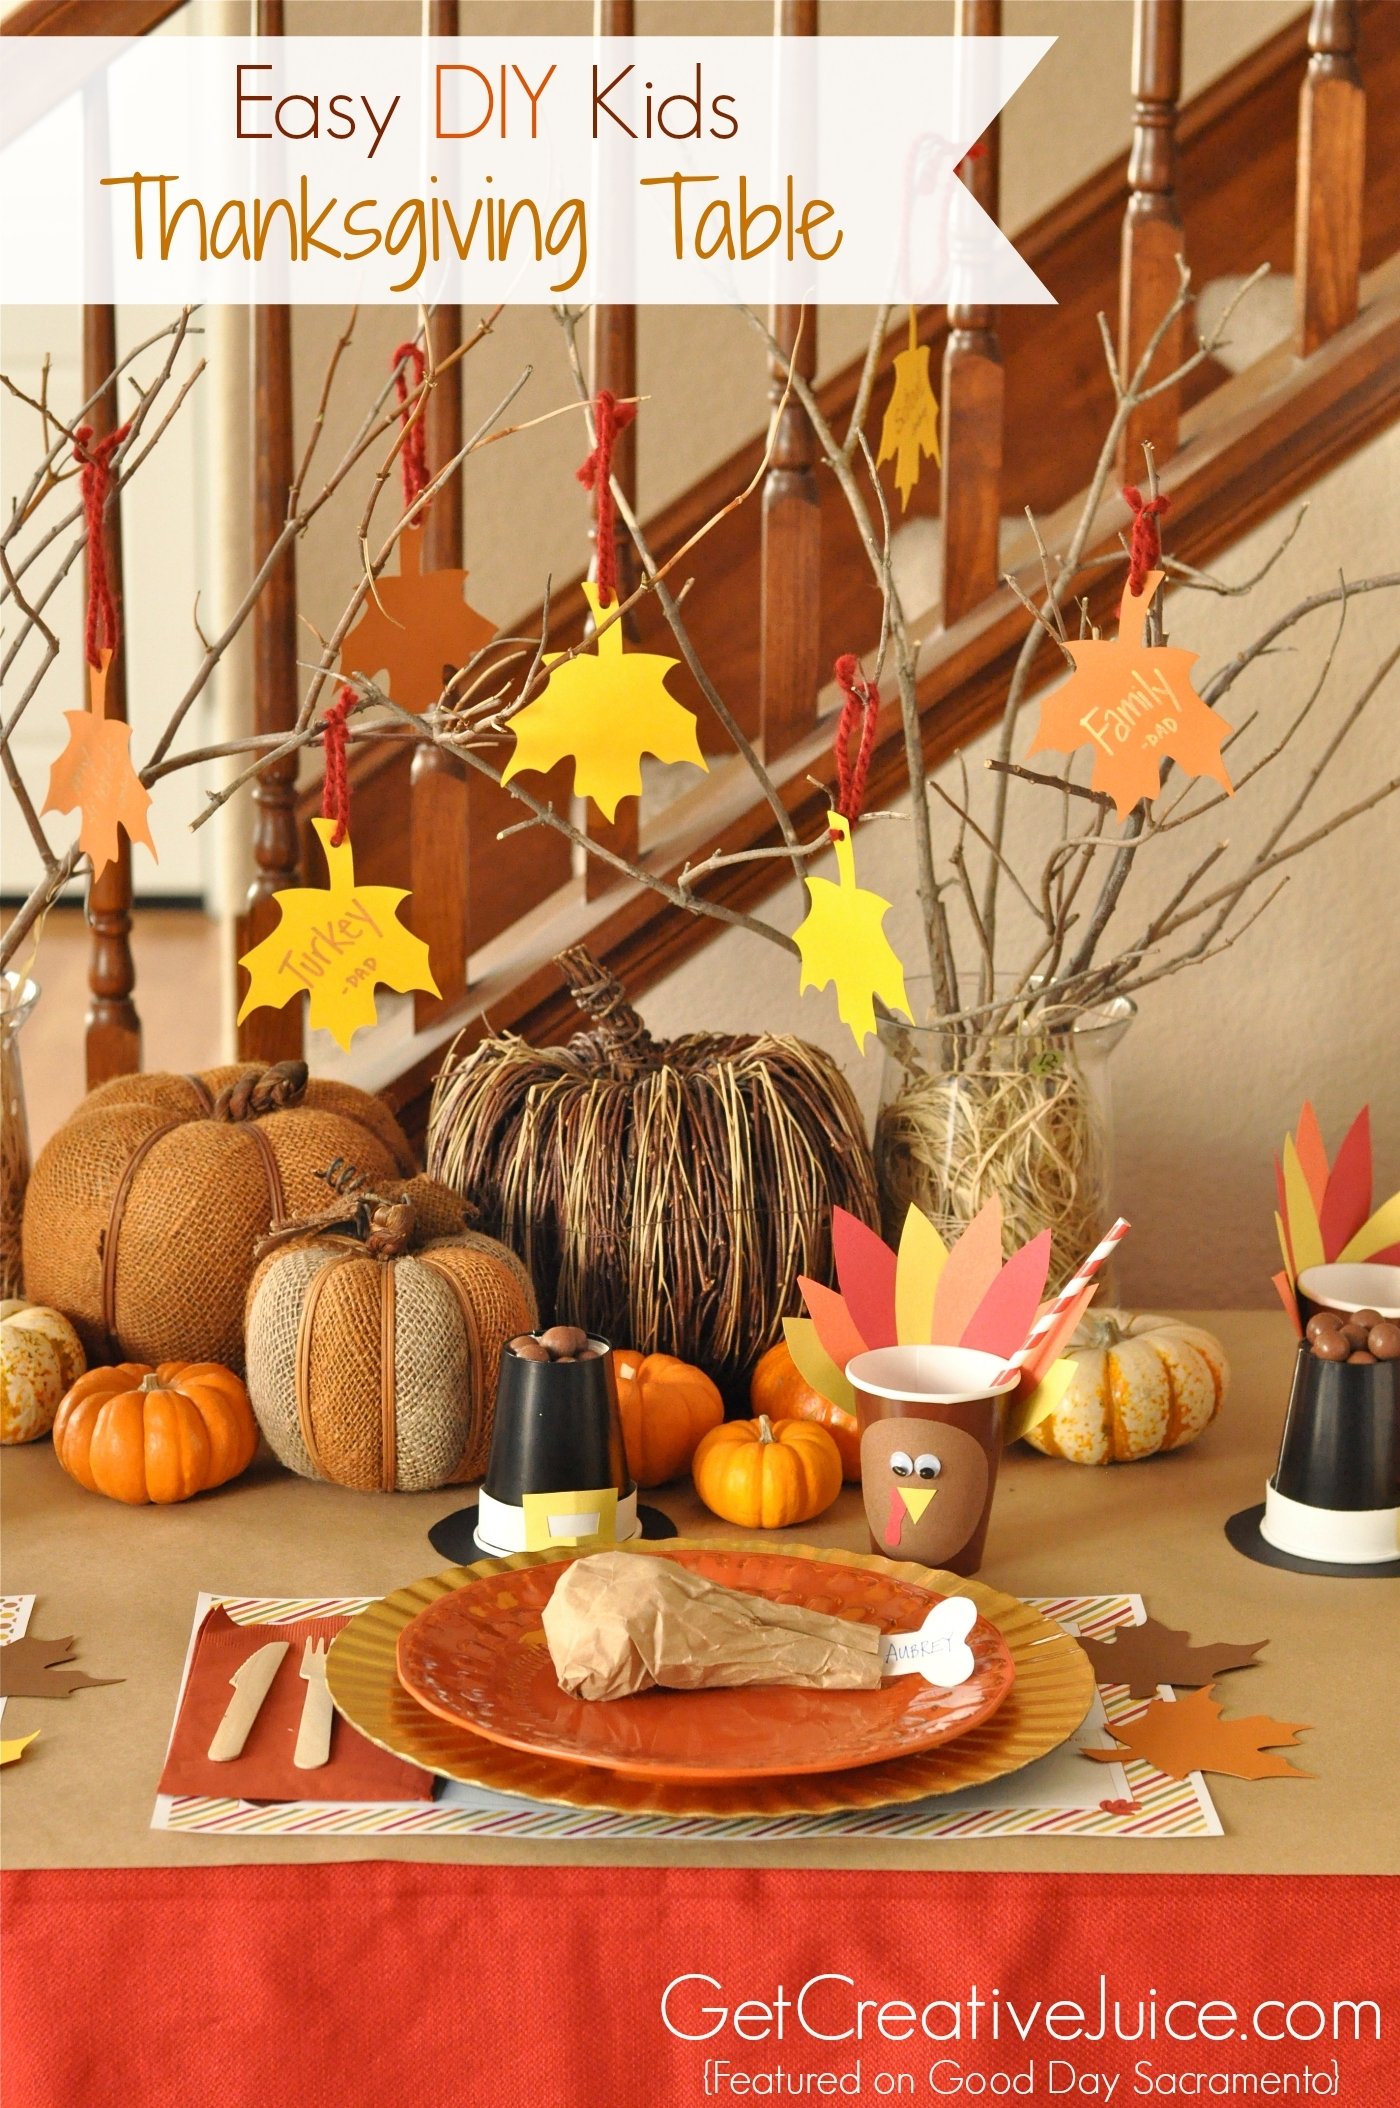 10 Spectacular Ideas For Thanksgiving Table Decorations easy diy kids thanksgiving table ideas creative juice 2022